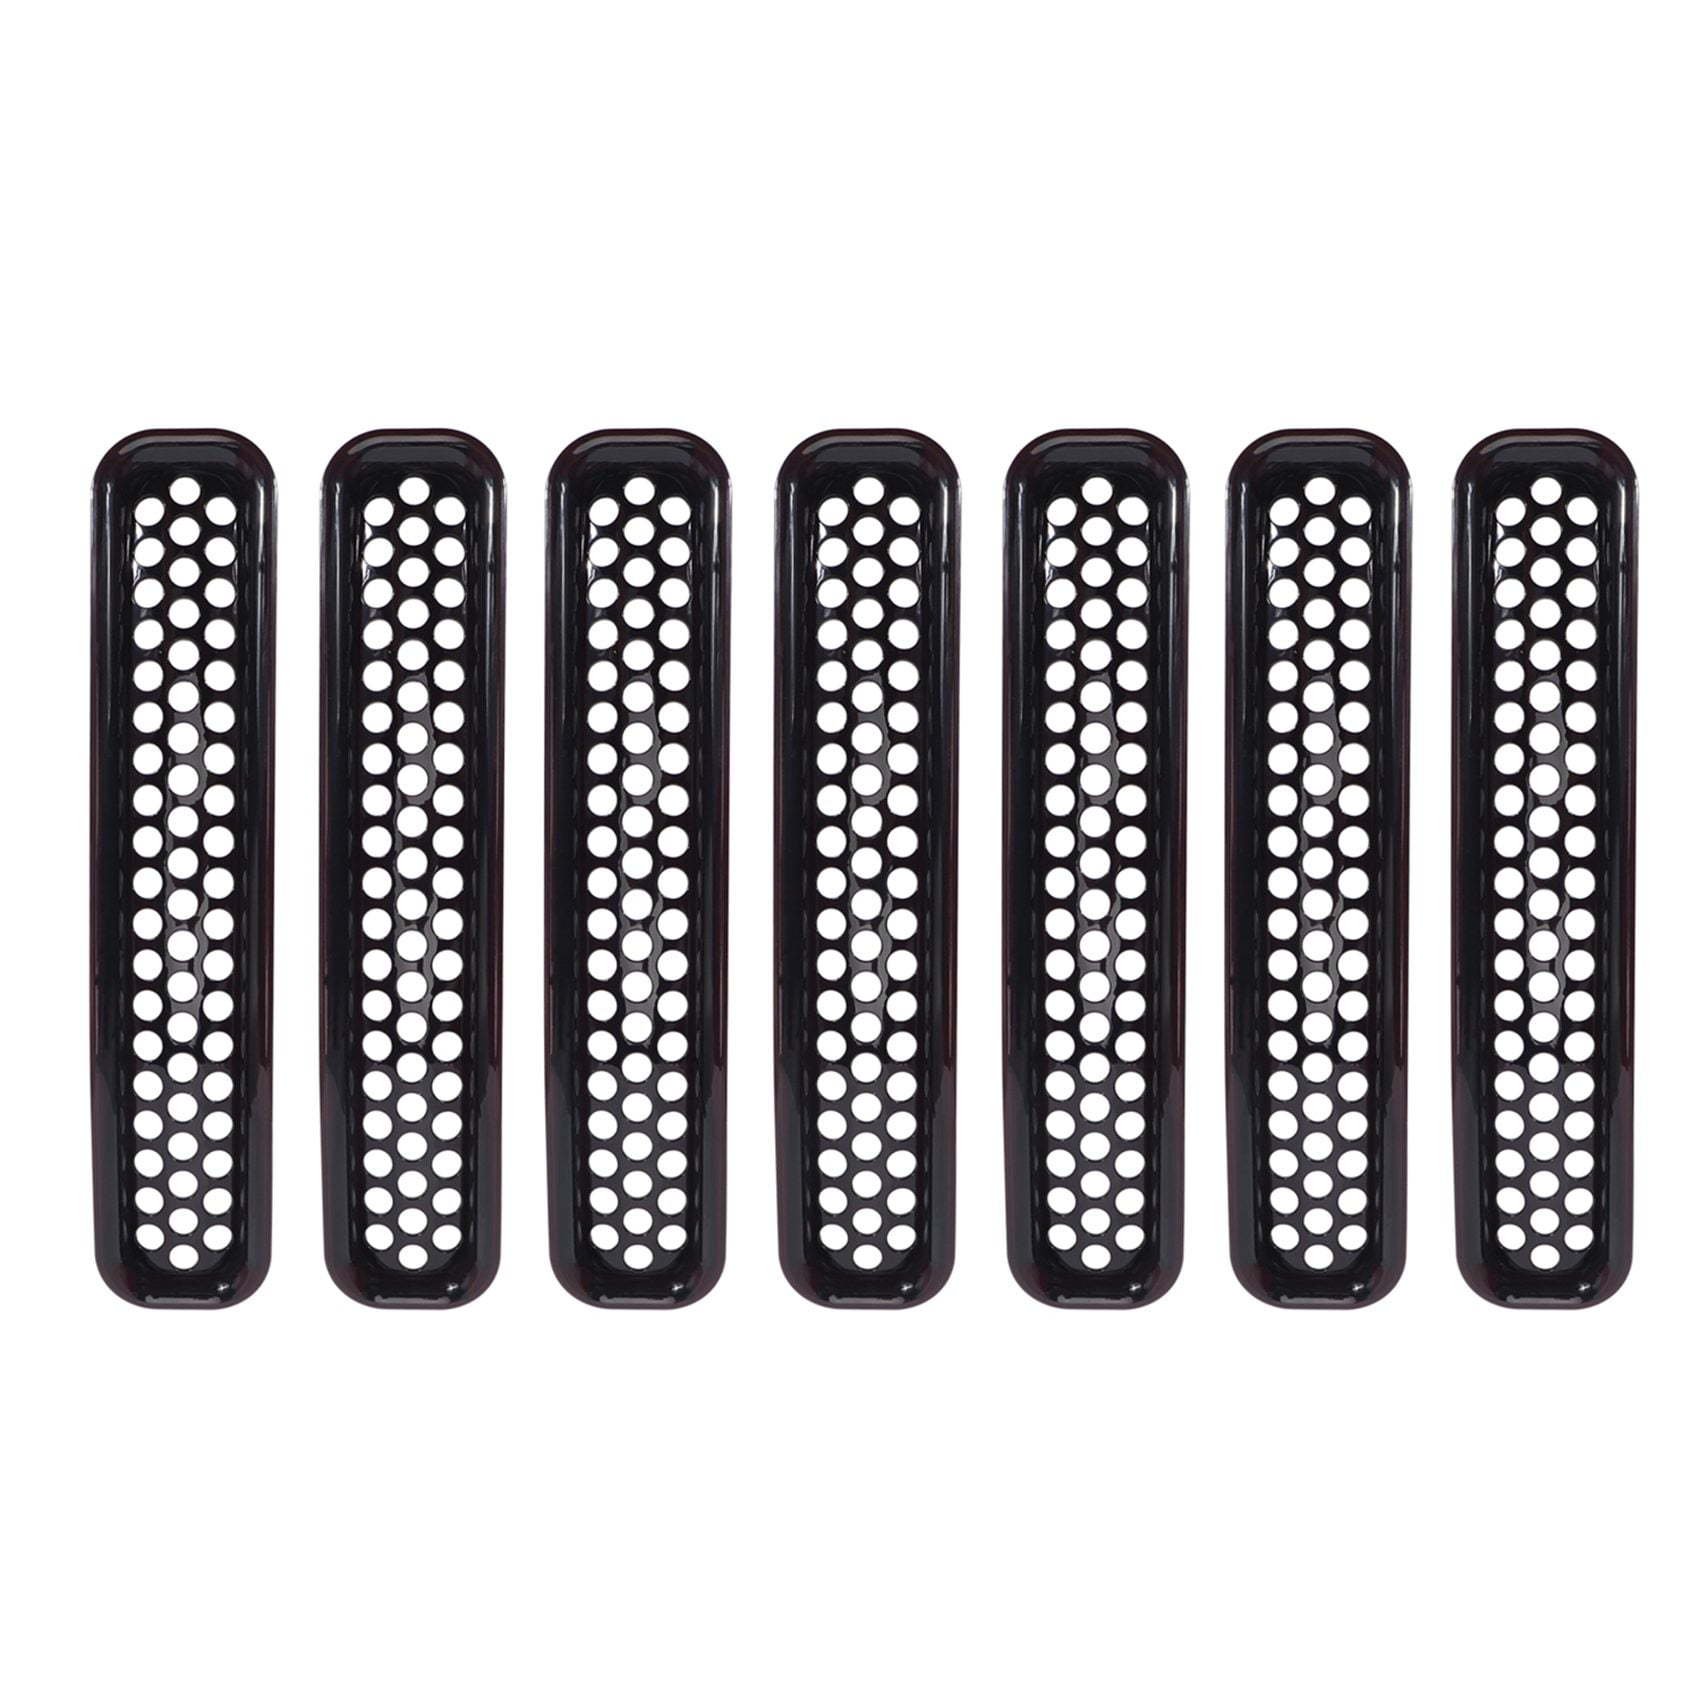 Honeycomb Mesh Front Grill Inserts Kit for 1997-2006 Jeep Wrangler TJ &  Unlimited - (7PCS) 